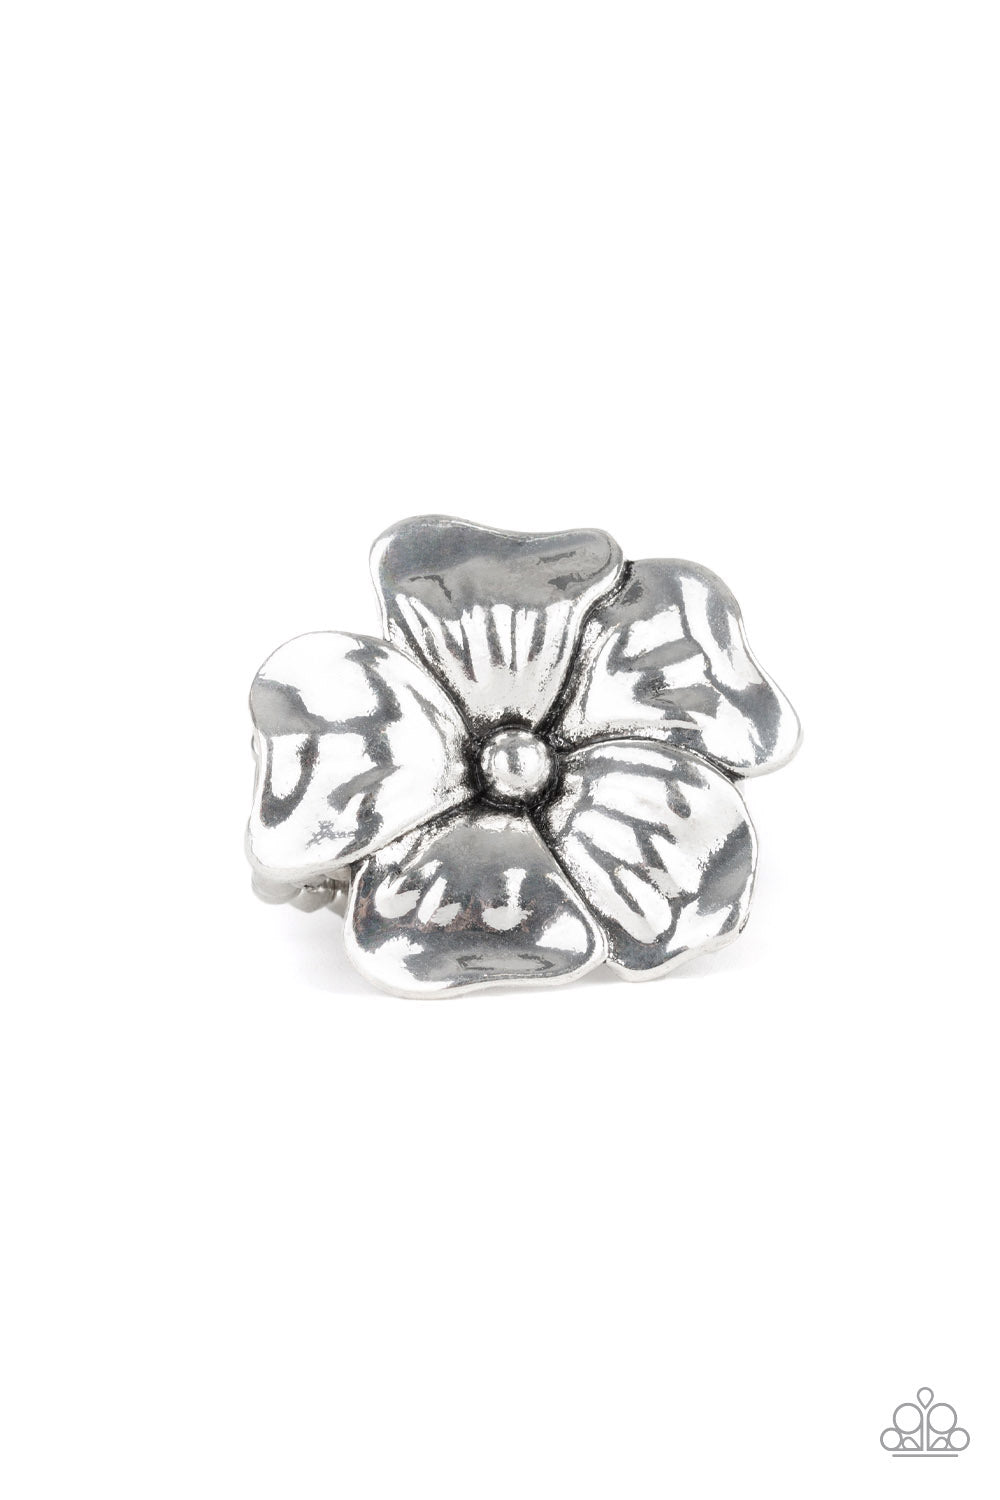 Brushed in an antiqued shimmer, glistening silver petals fold into a tropical inspired flower atop the finger for a seasonal flair. Features a stretchy band for a flexible fit.  Sold as one individual ring.